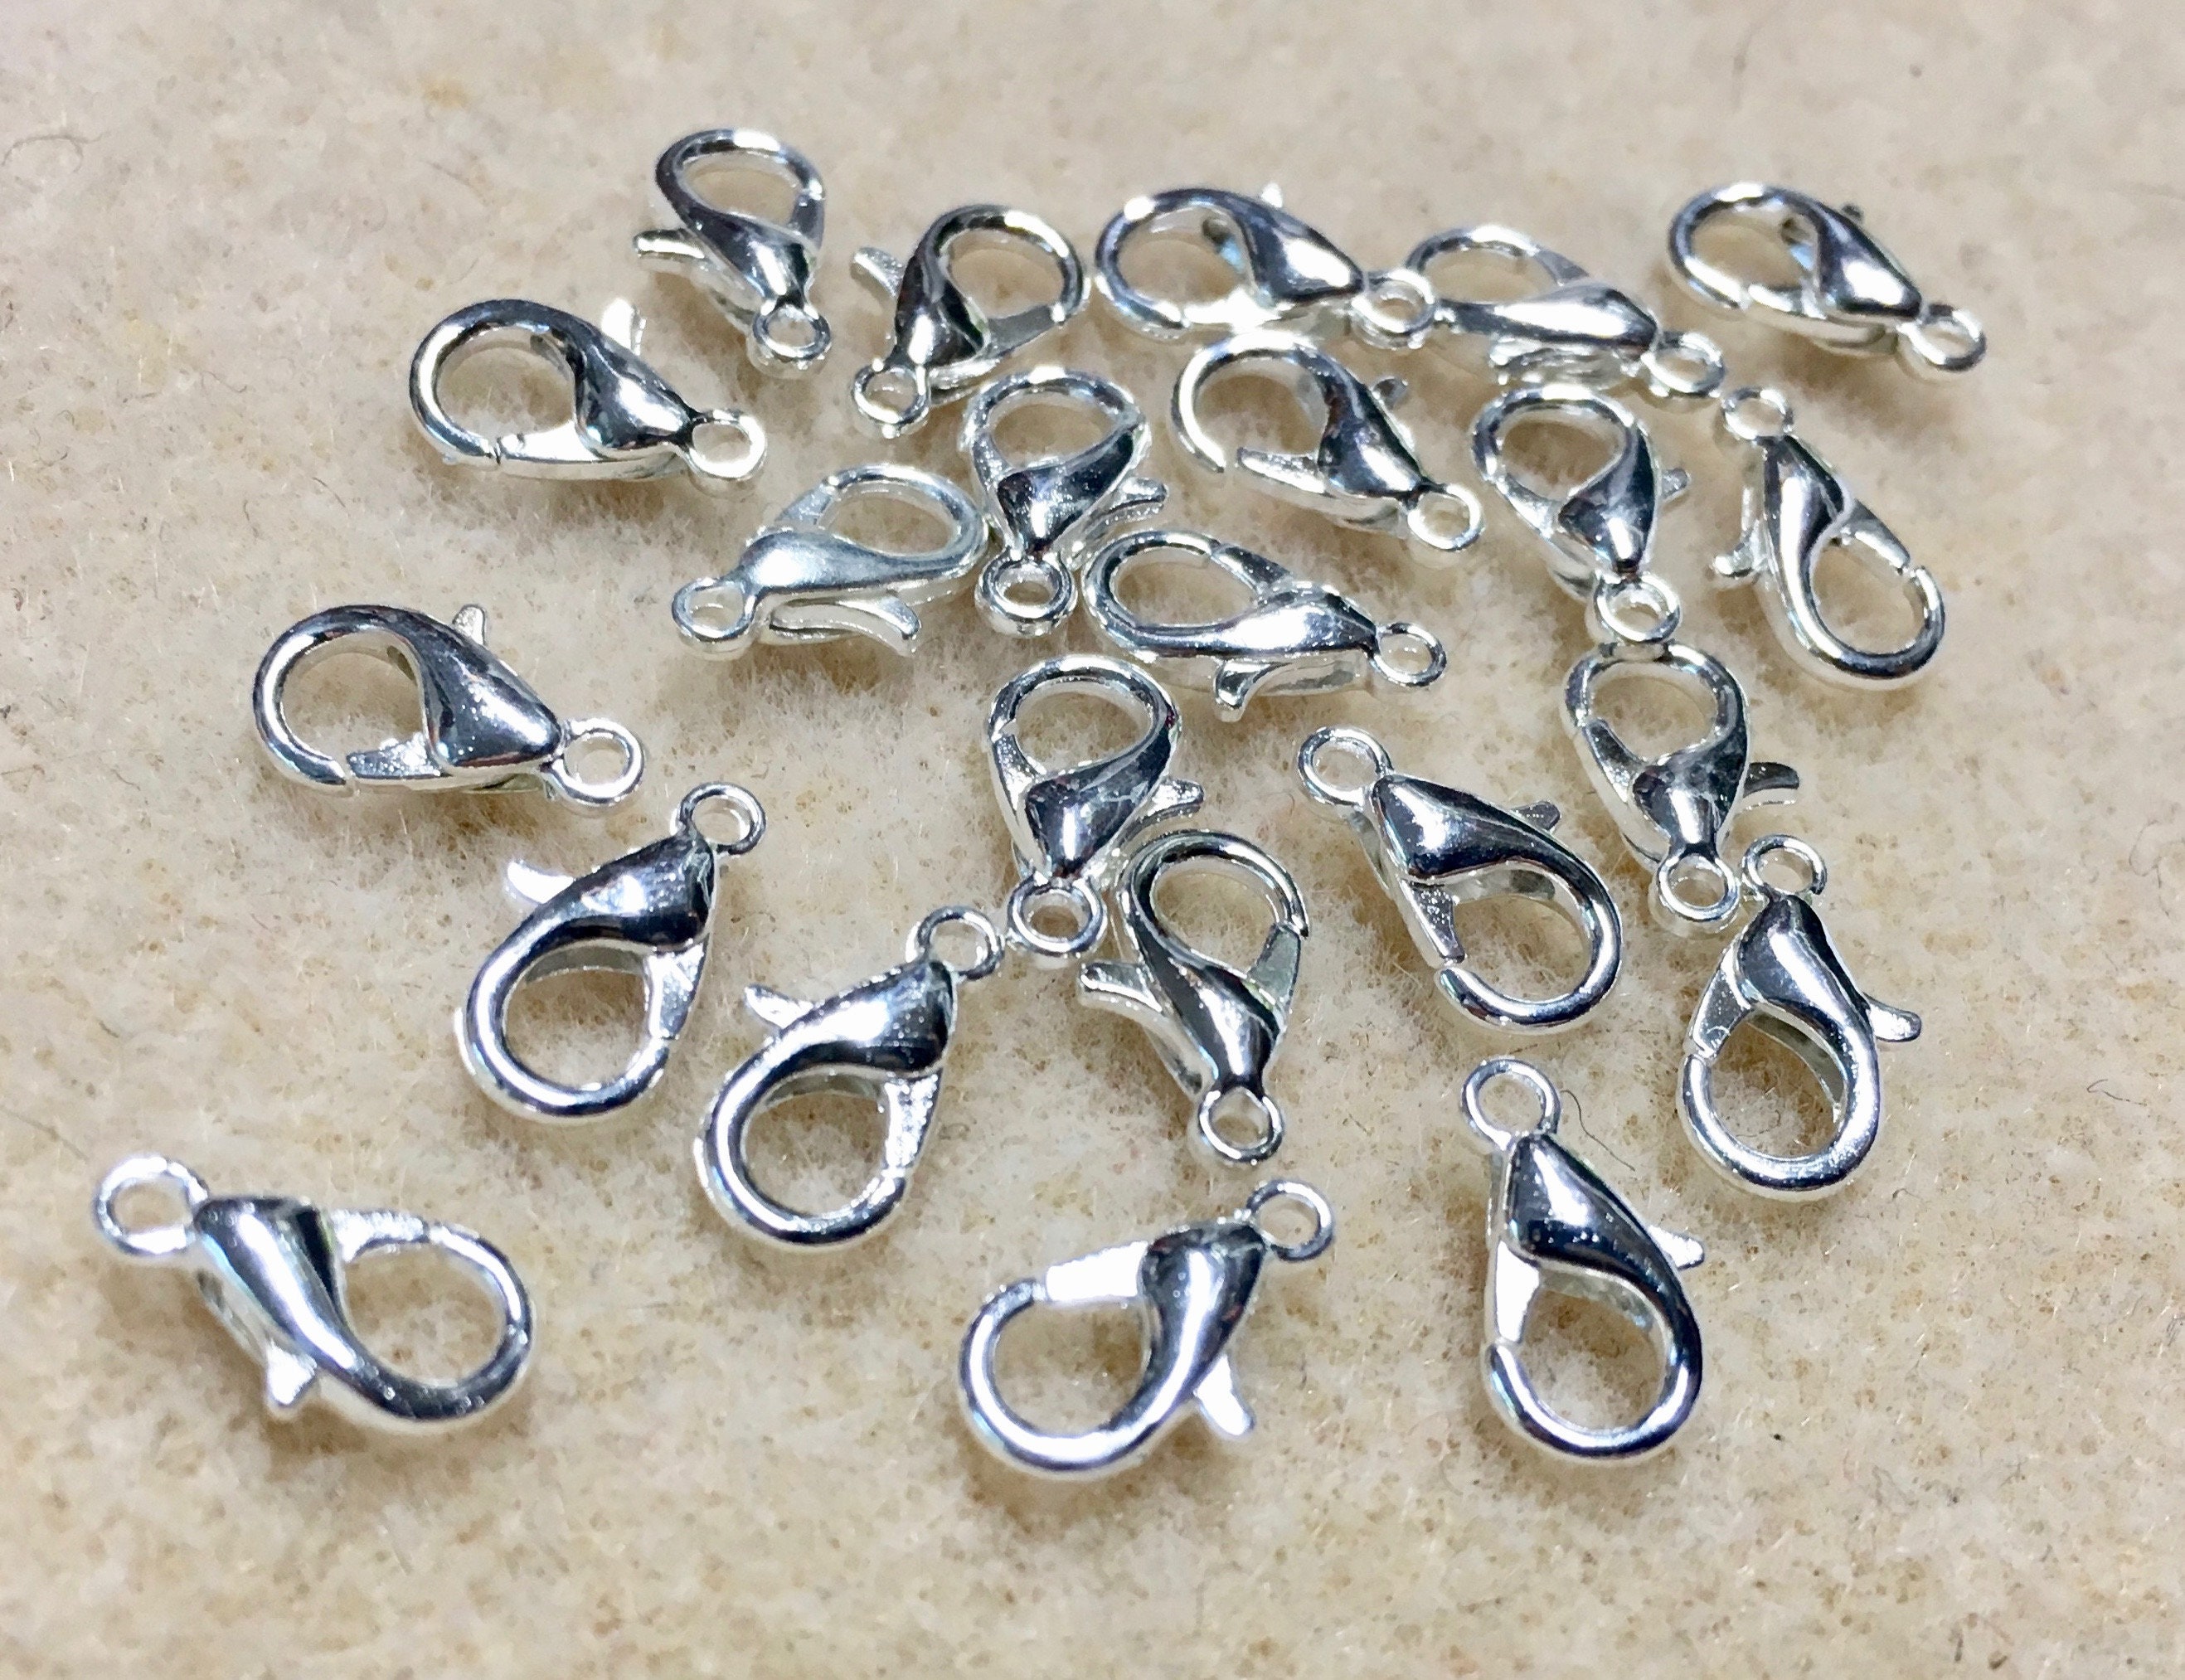 SILVER PLATED 14 x 7  LOBSTER CLASPS WITH JUMP RINGS IDEAL JEWELLERY MAKING 